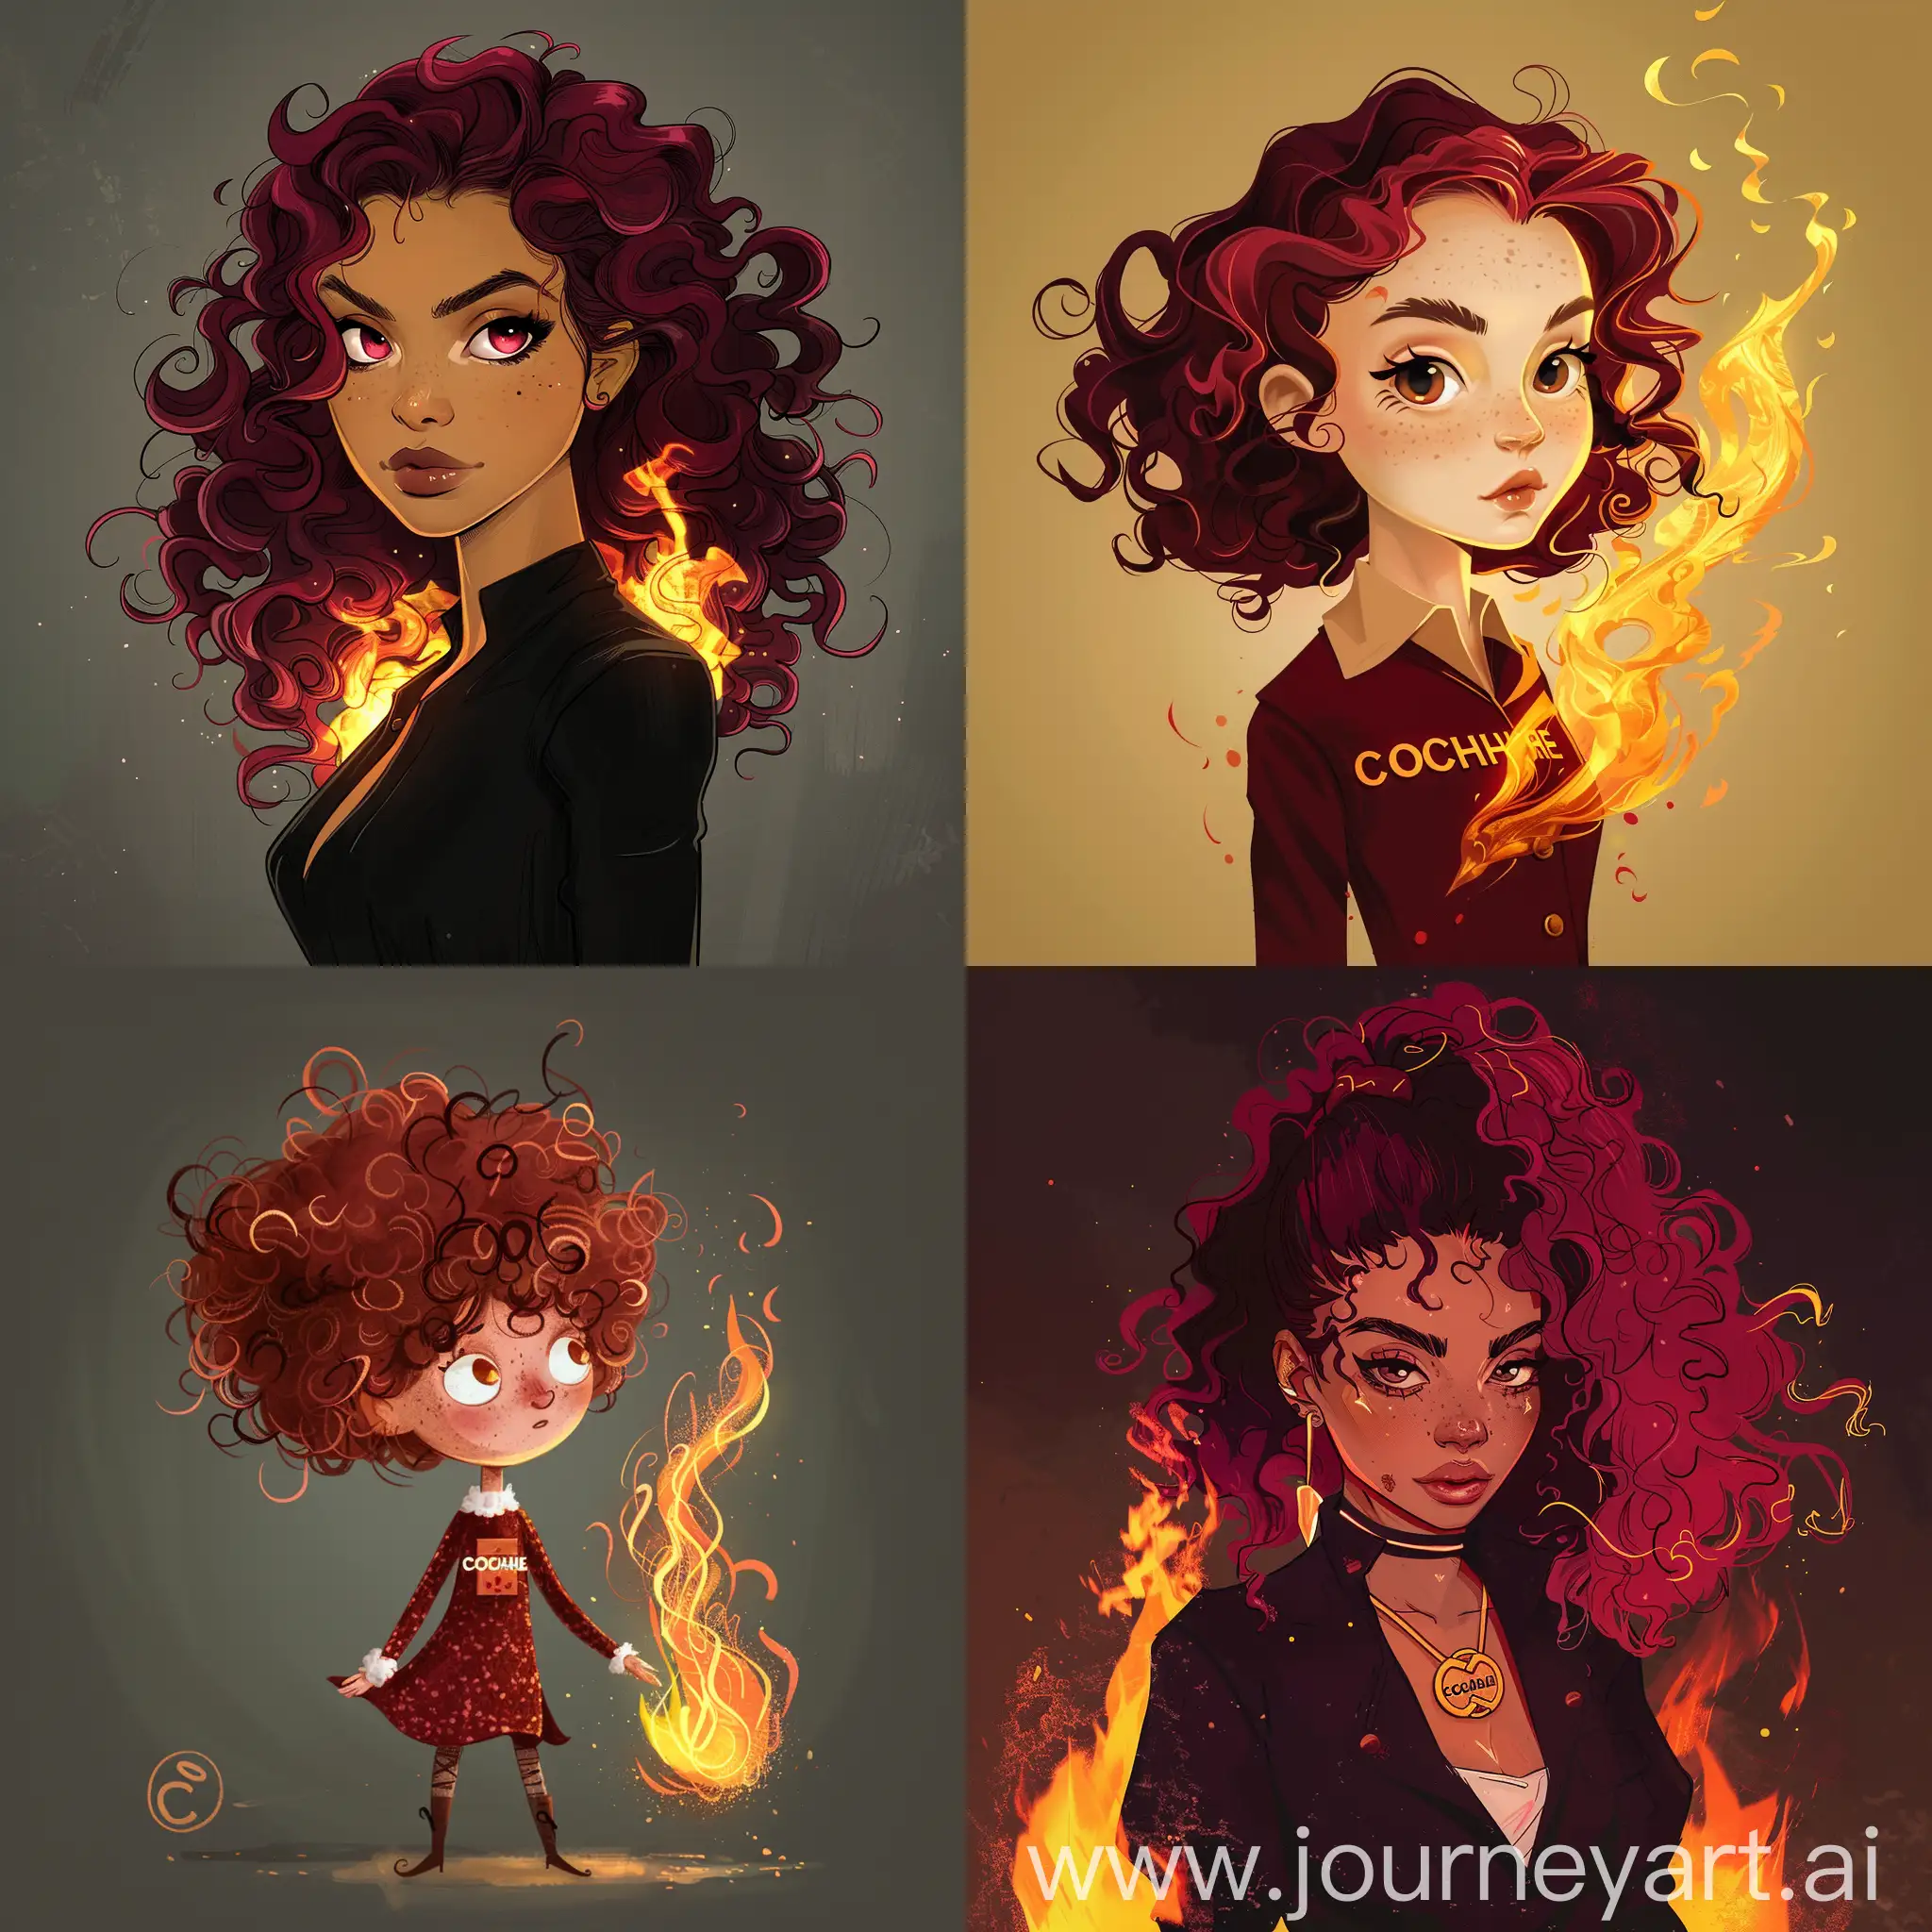 Fashionable-Girl-with-WineColored-Curly-Hair-and-a-Love-for-Fire